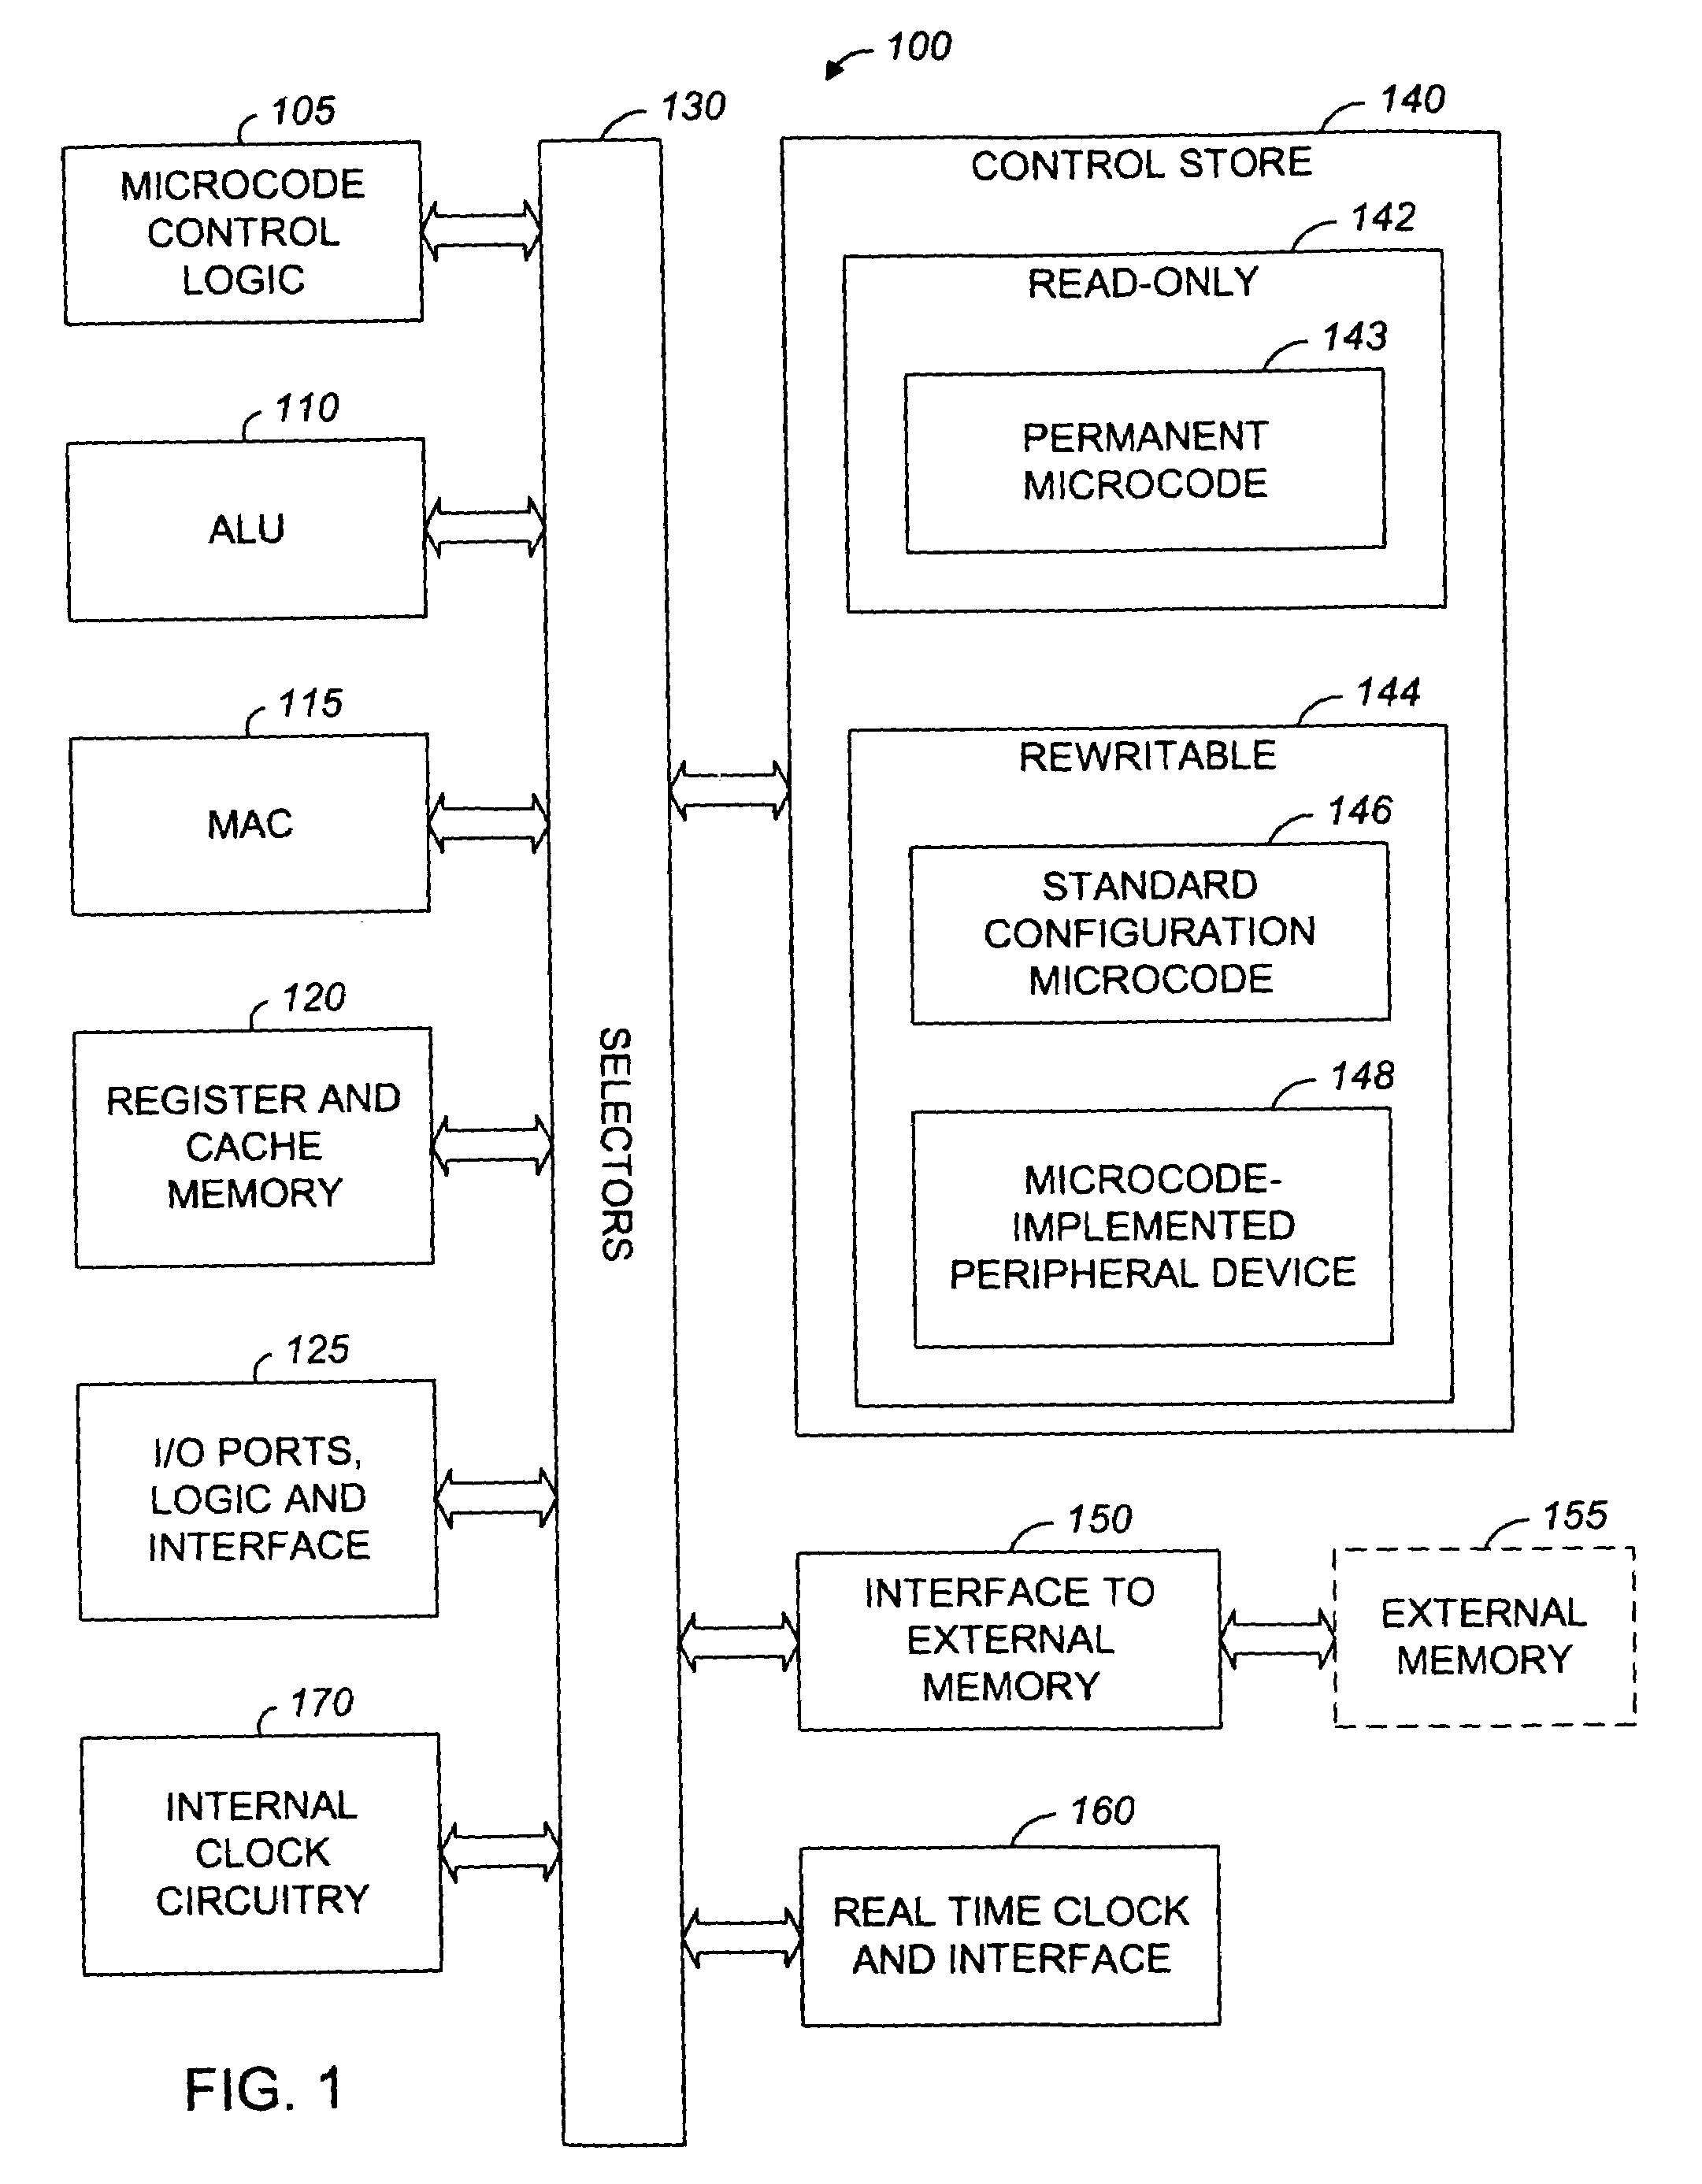 Microcontroller architecture supporting microcode-implemented peripheral devices